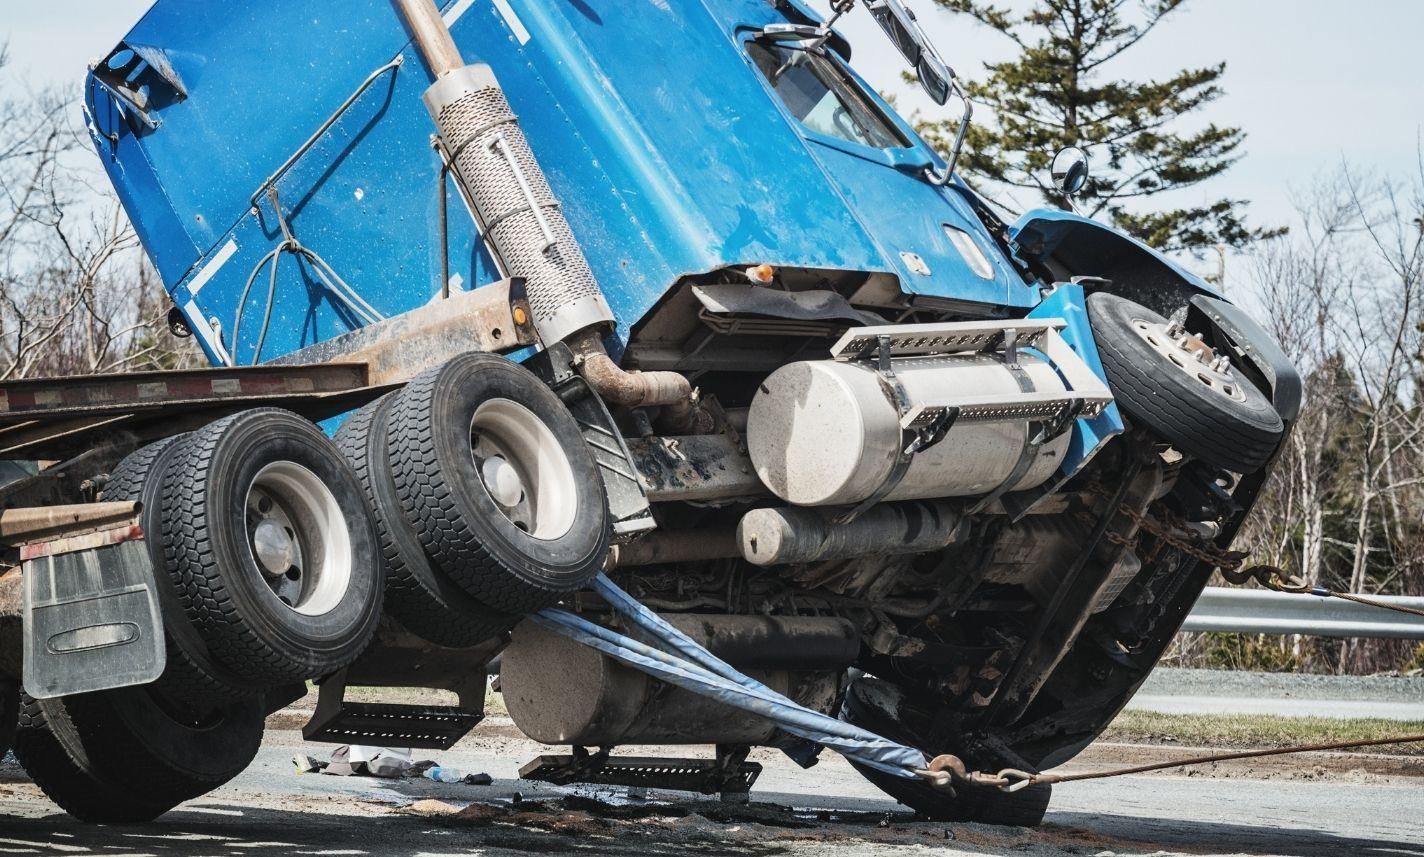 nicholls-commercial-truck-accident-injury-lawyer